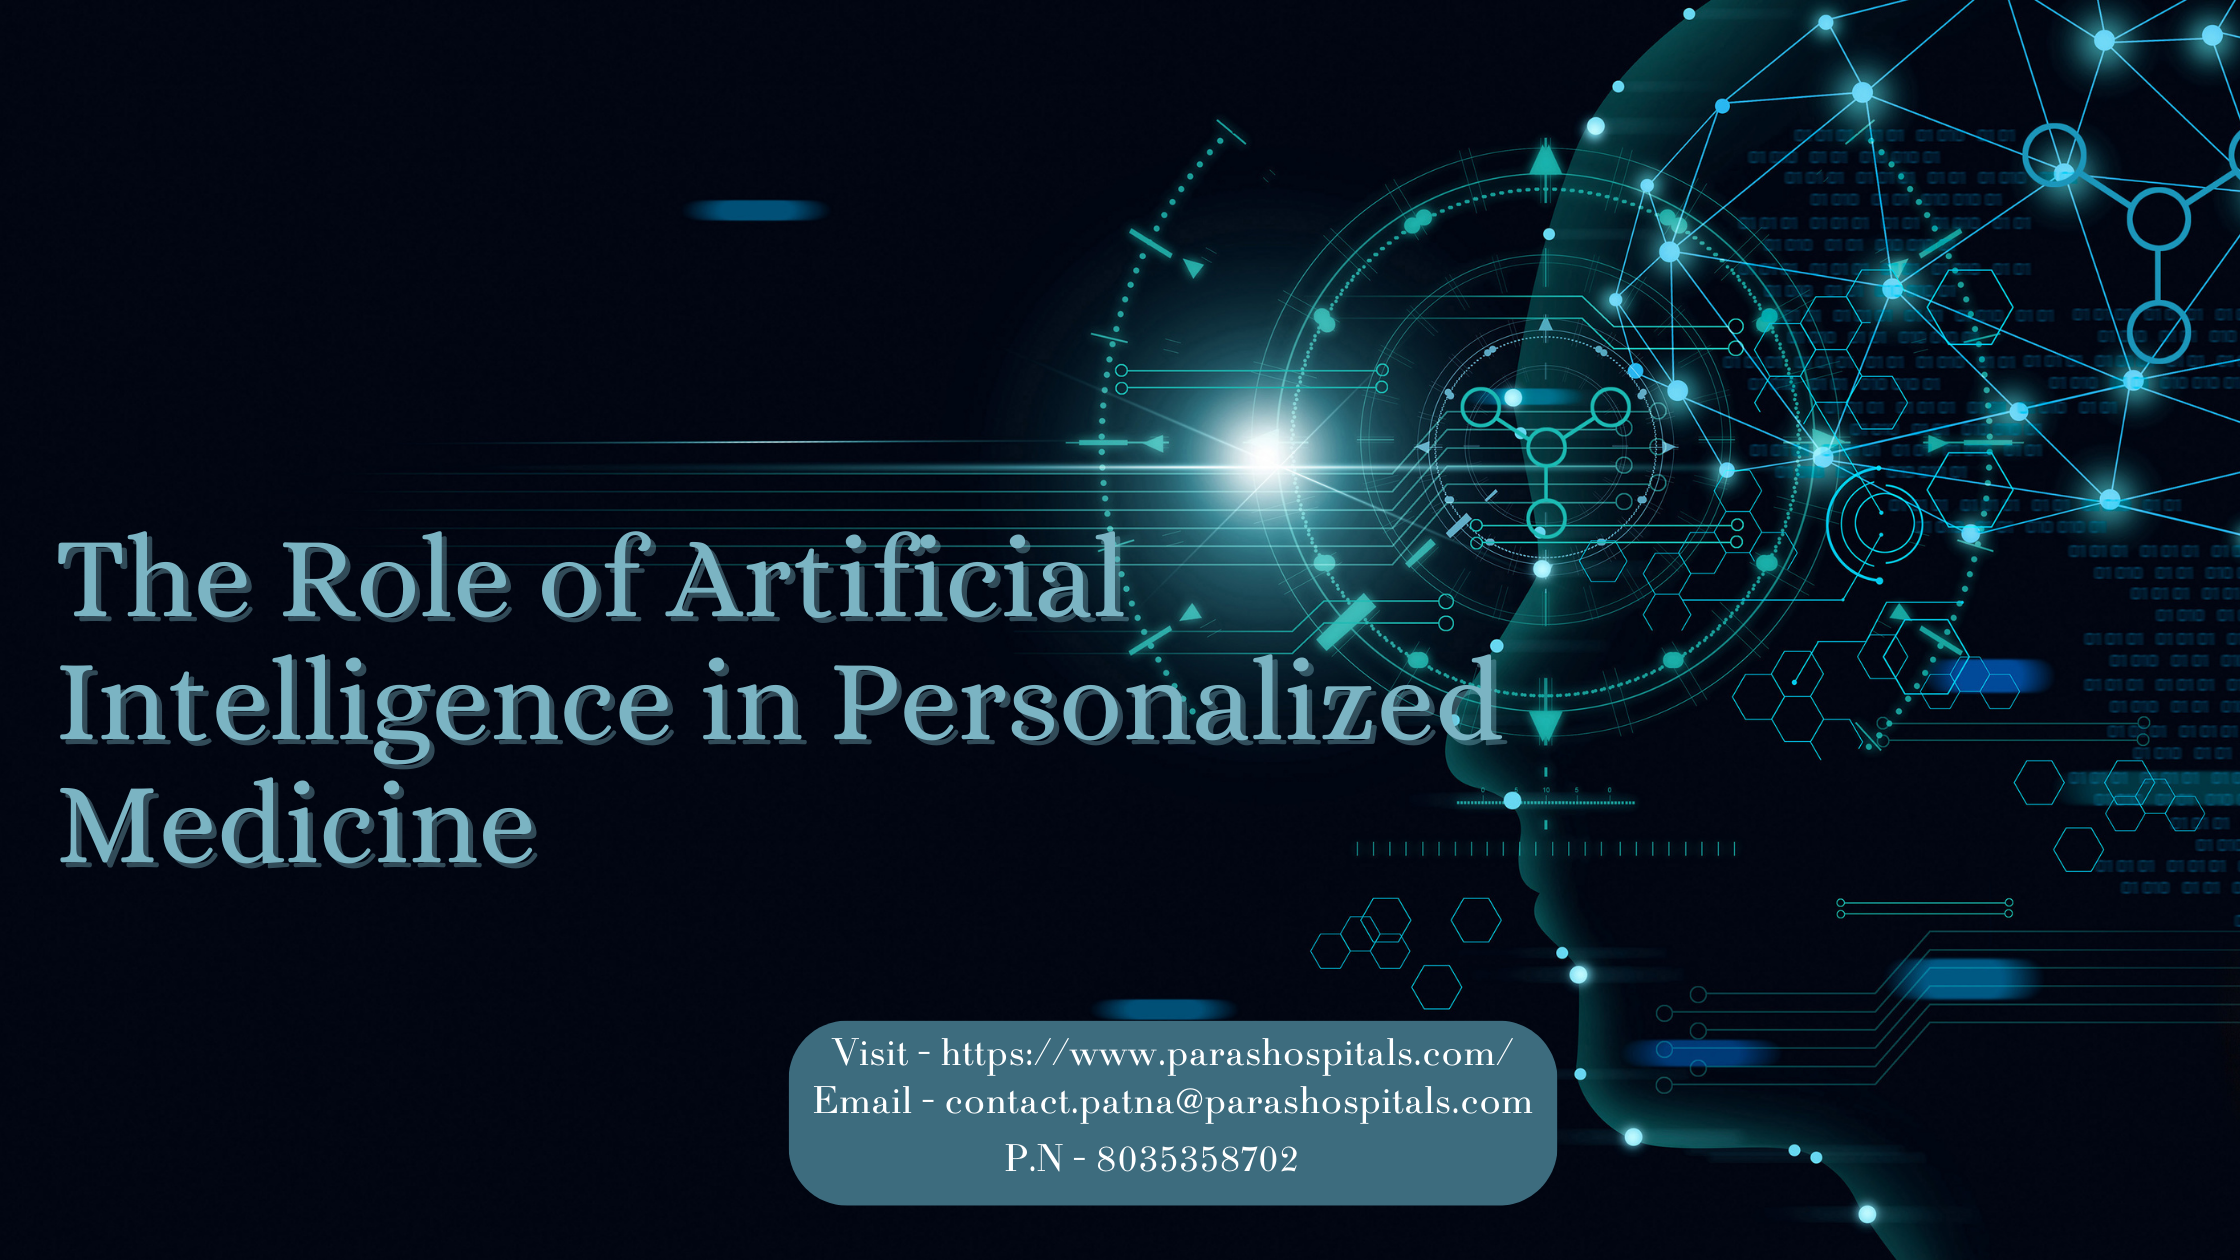 The Role of Artificial Intelligence in Personalized Medicine